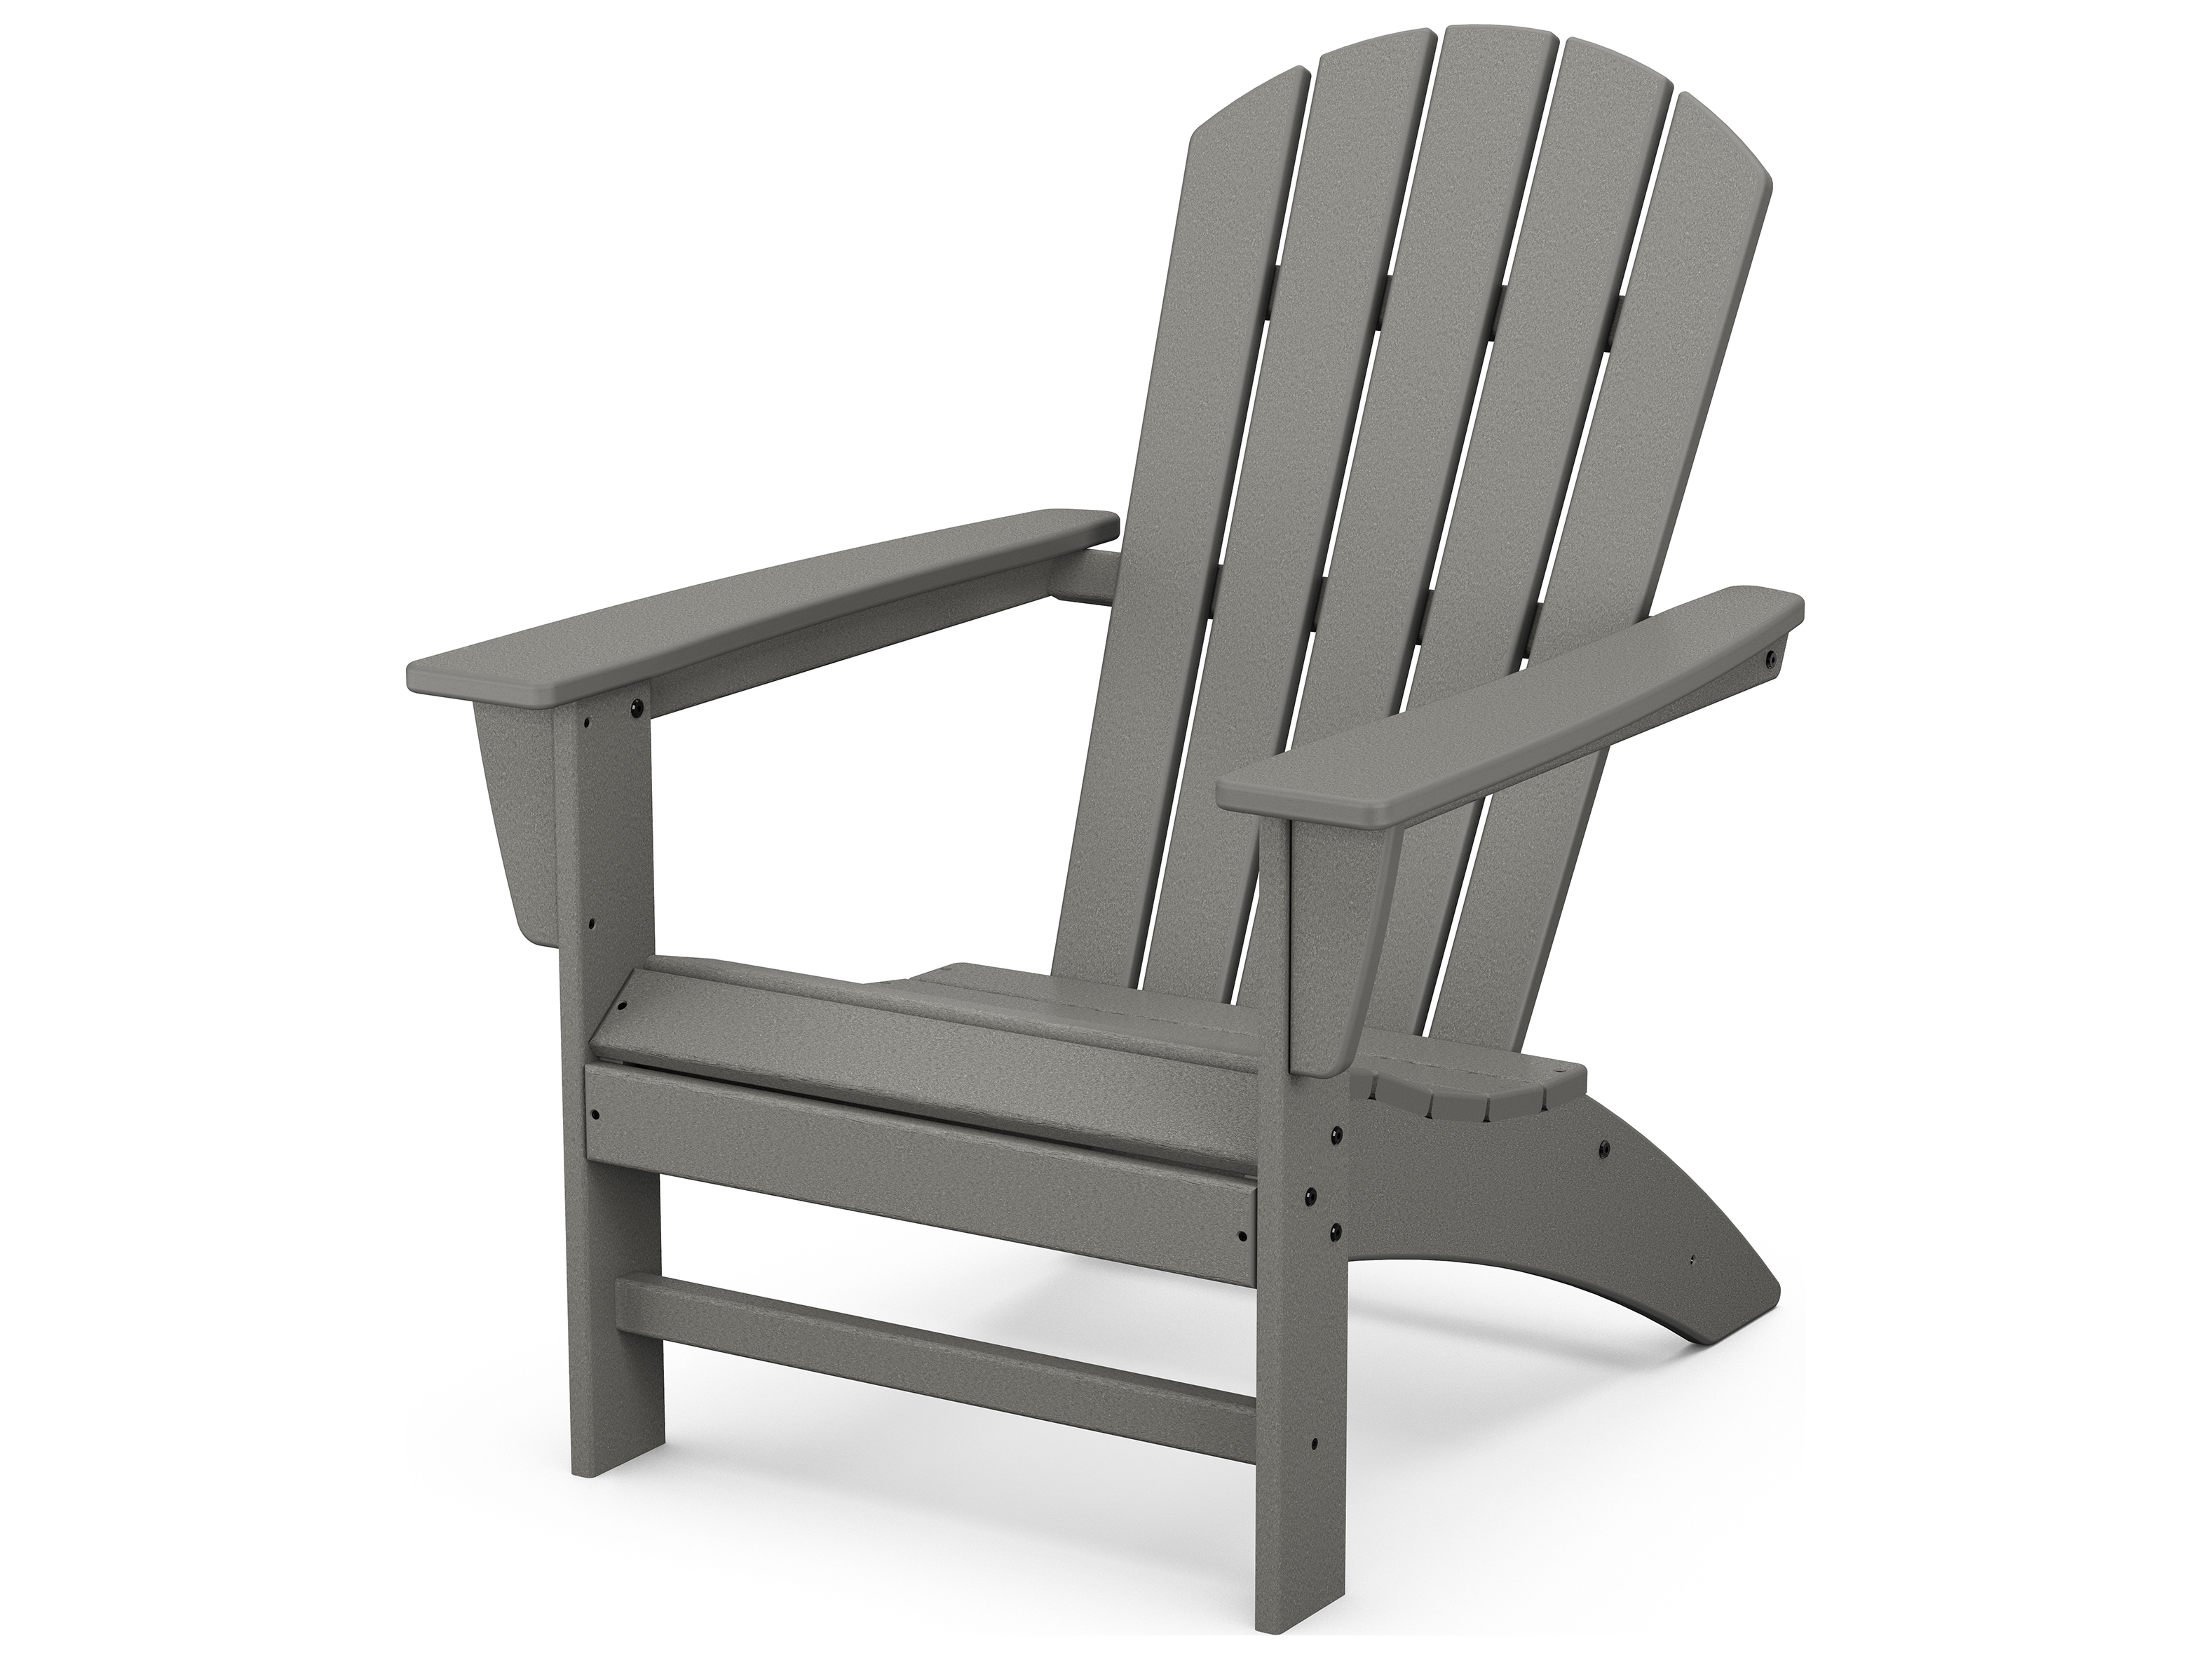 Solid Charcoal Grey / Gray Choose Color Indoor/Outdoor Tufted Adirondack Chair Seat Cushion RSH Décor